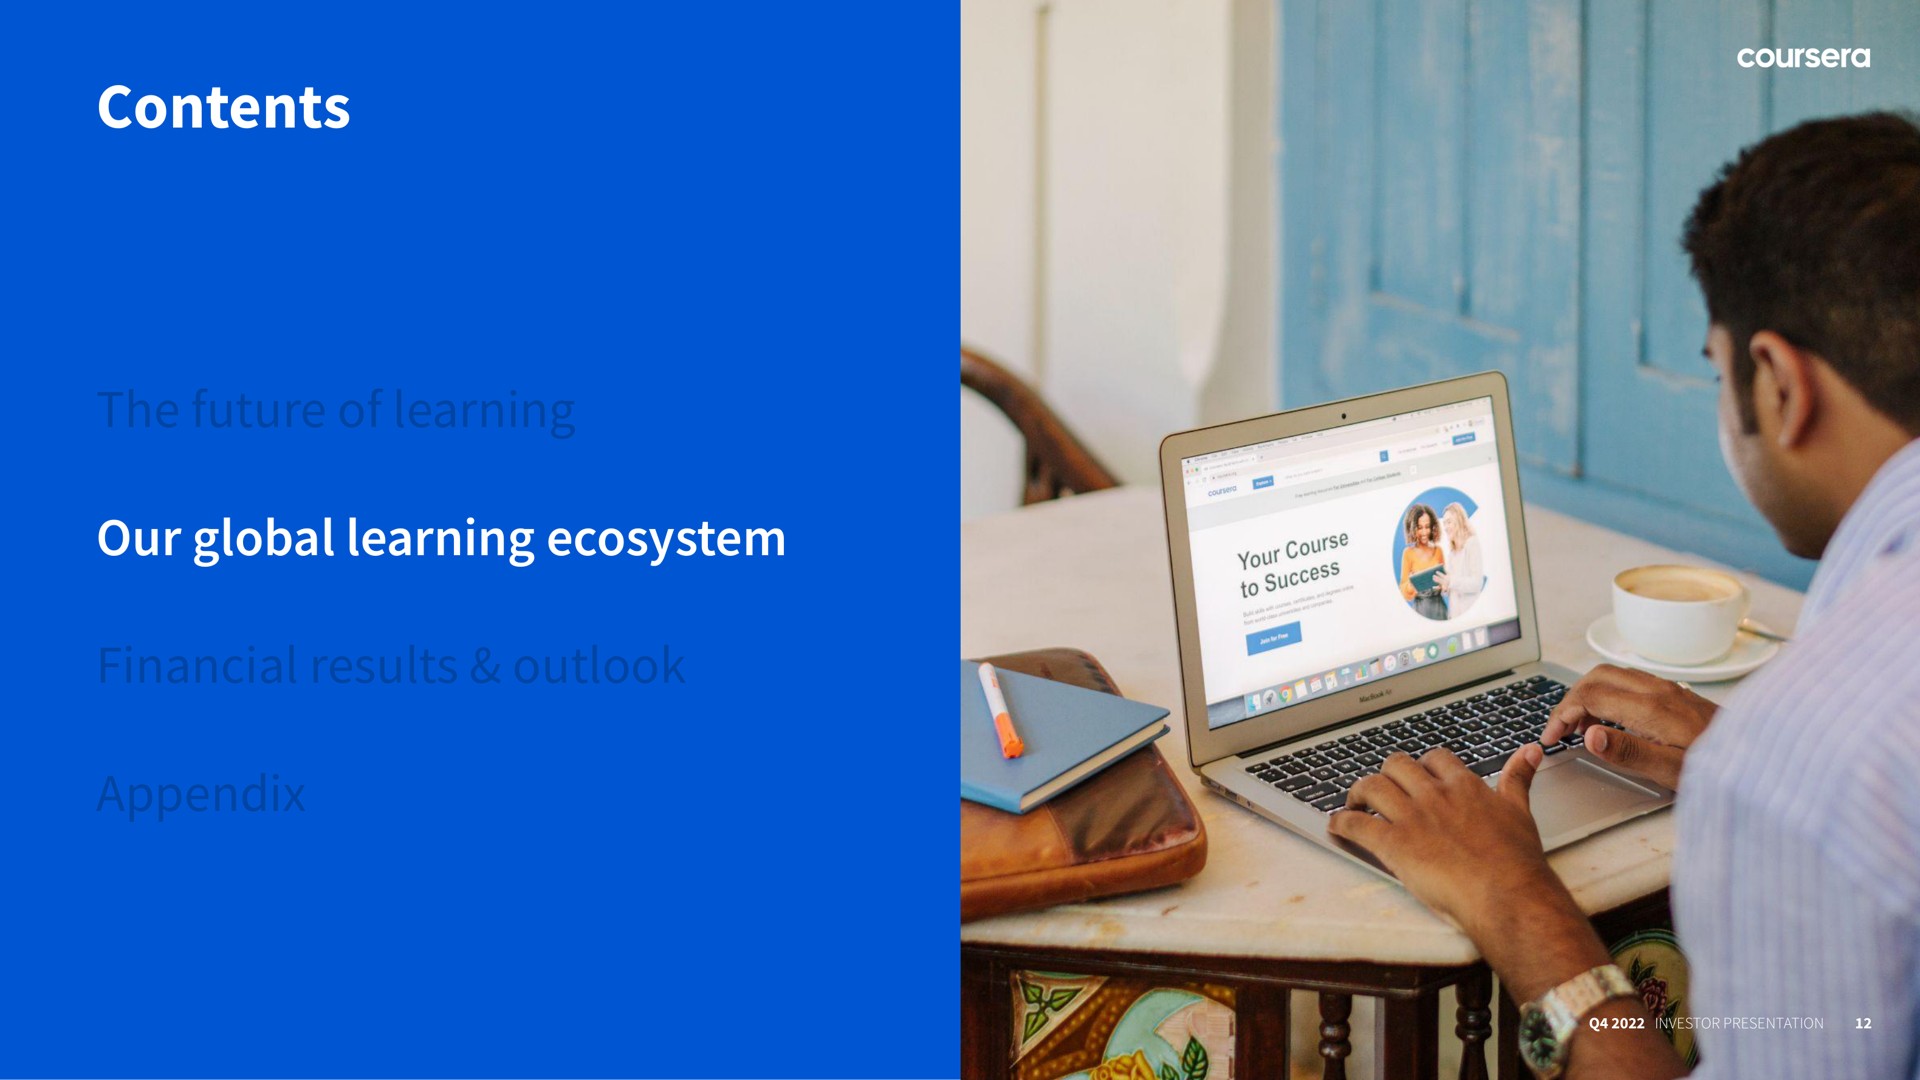 aha your our global learning ecosystem | Coursera